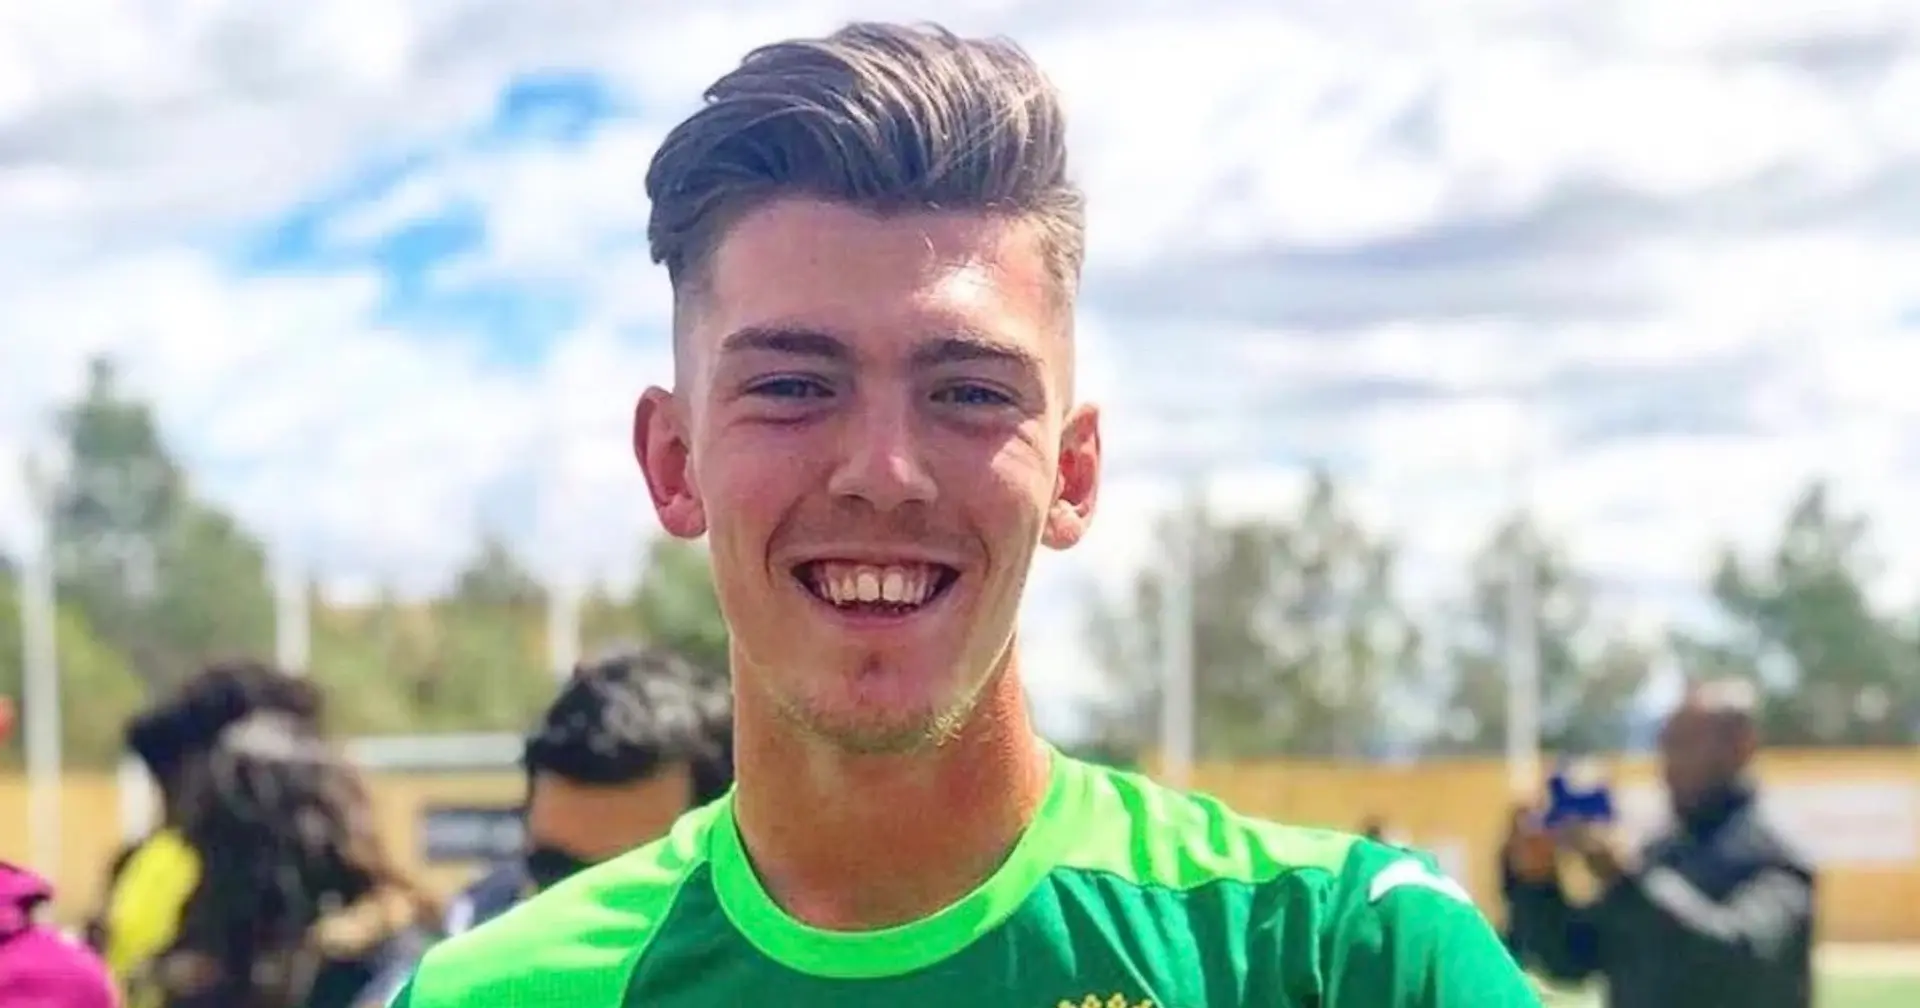 Liverpool 'considering offer' to 19-year-old keeper Javi Cendon after he impresses coaching staff on trial